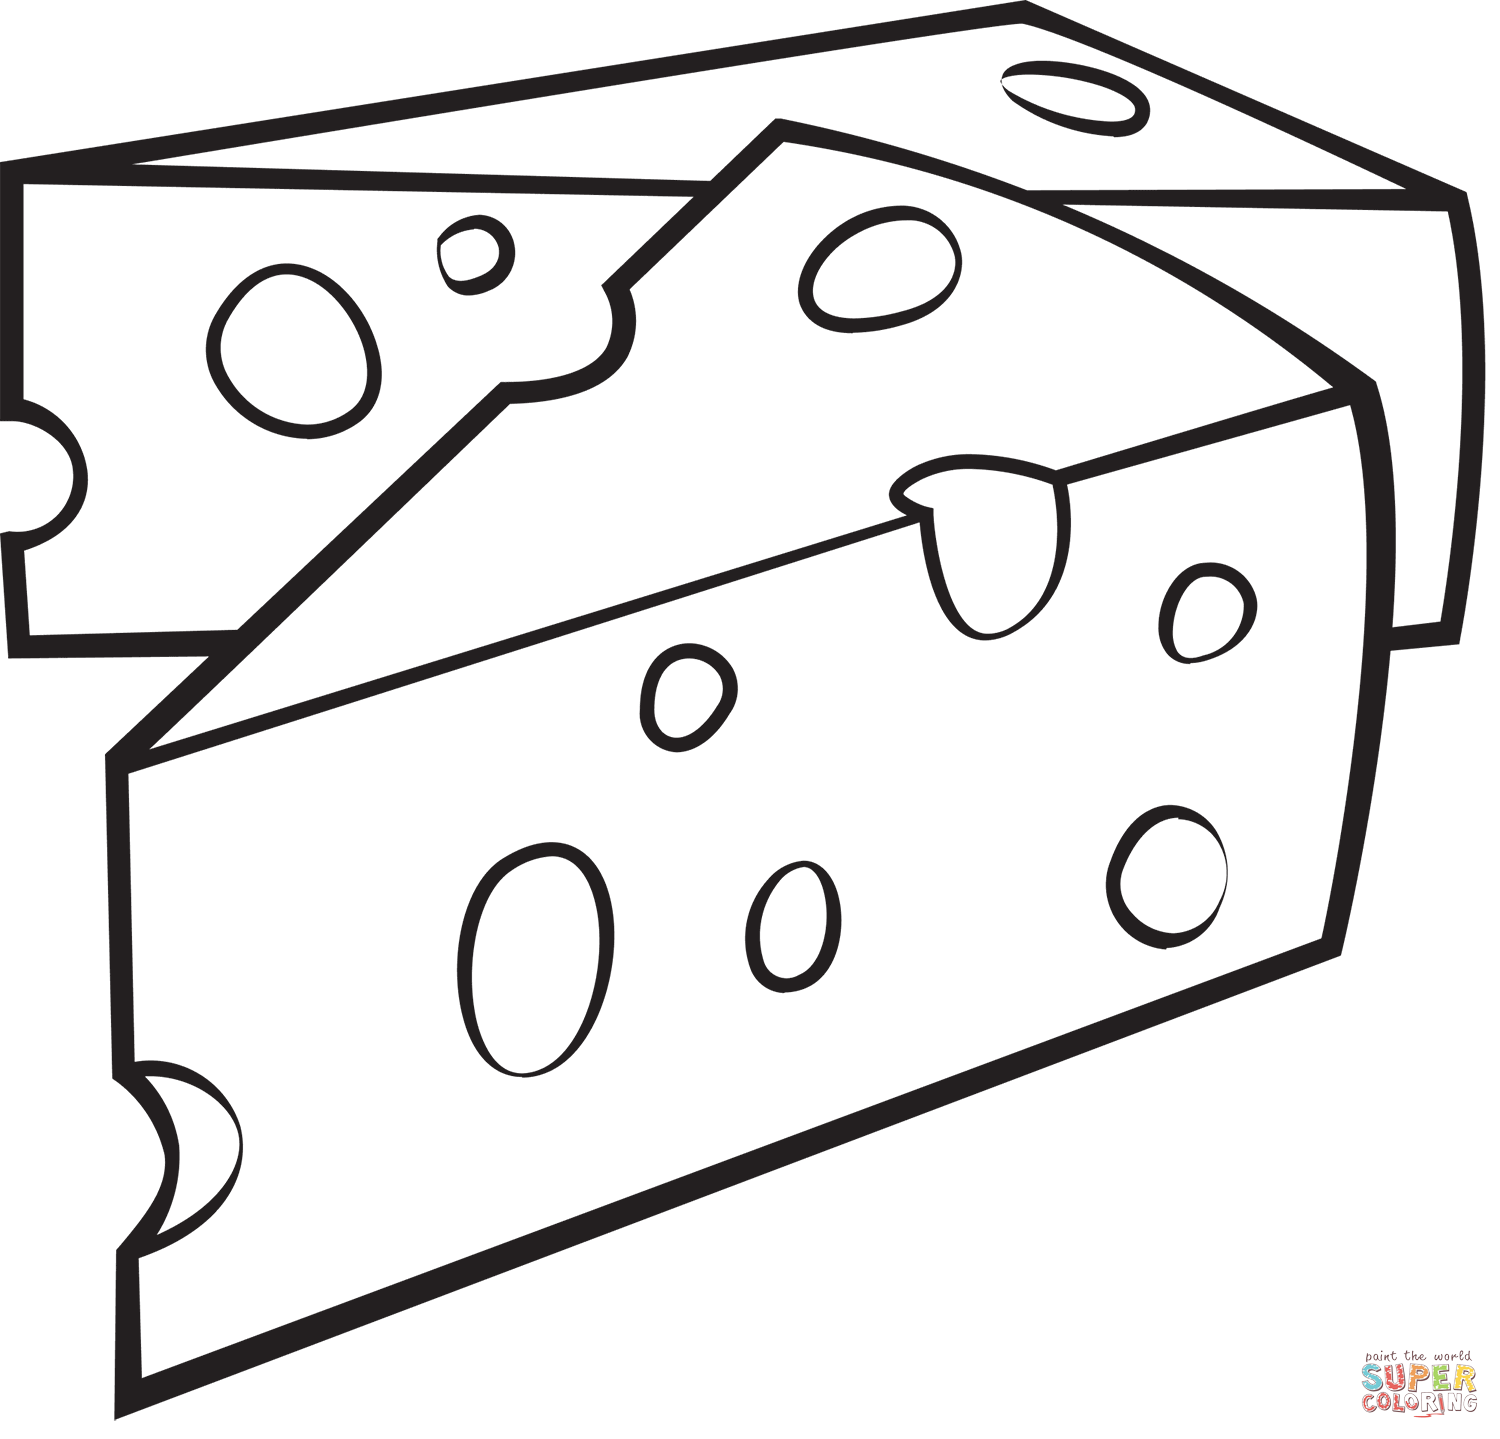 Cheese coloring page free printable coloring pages